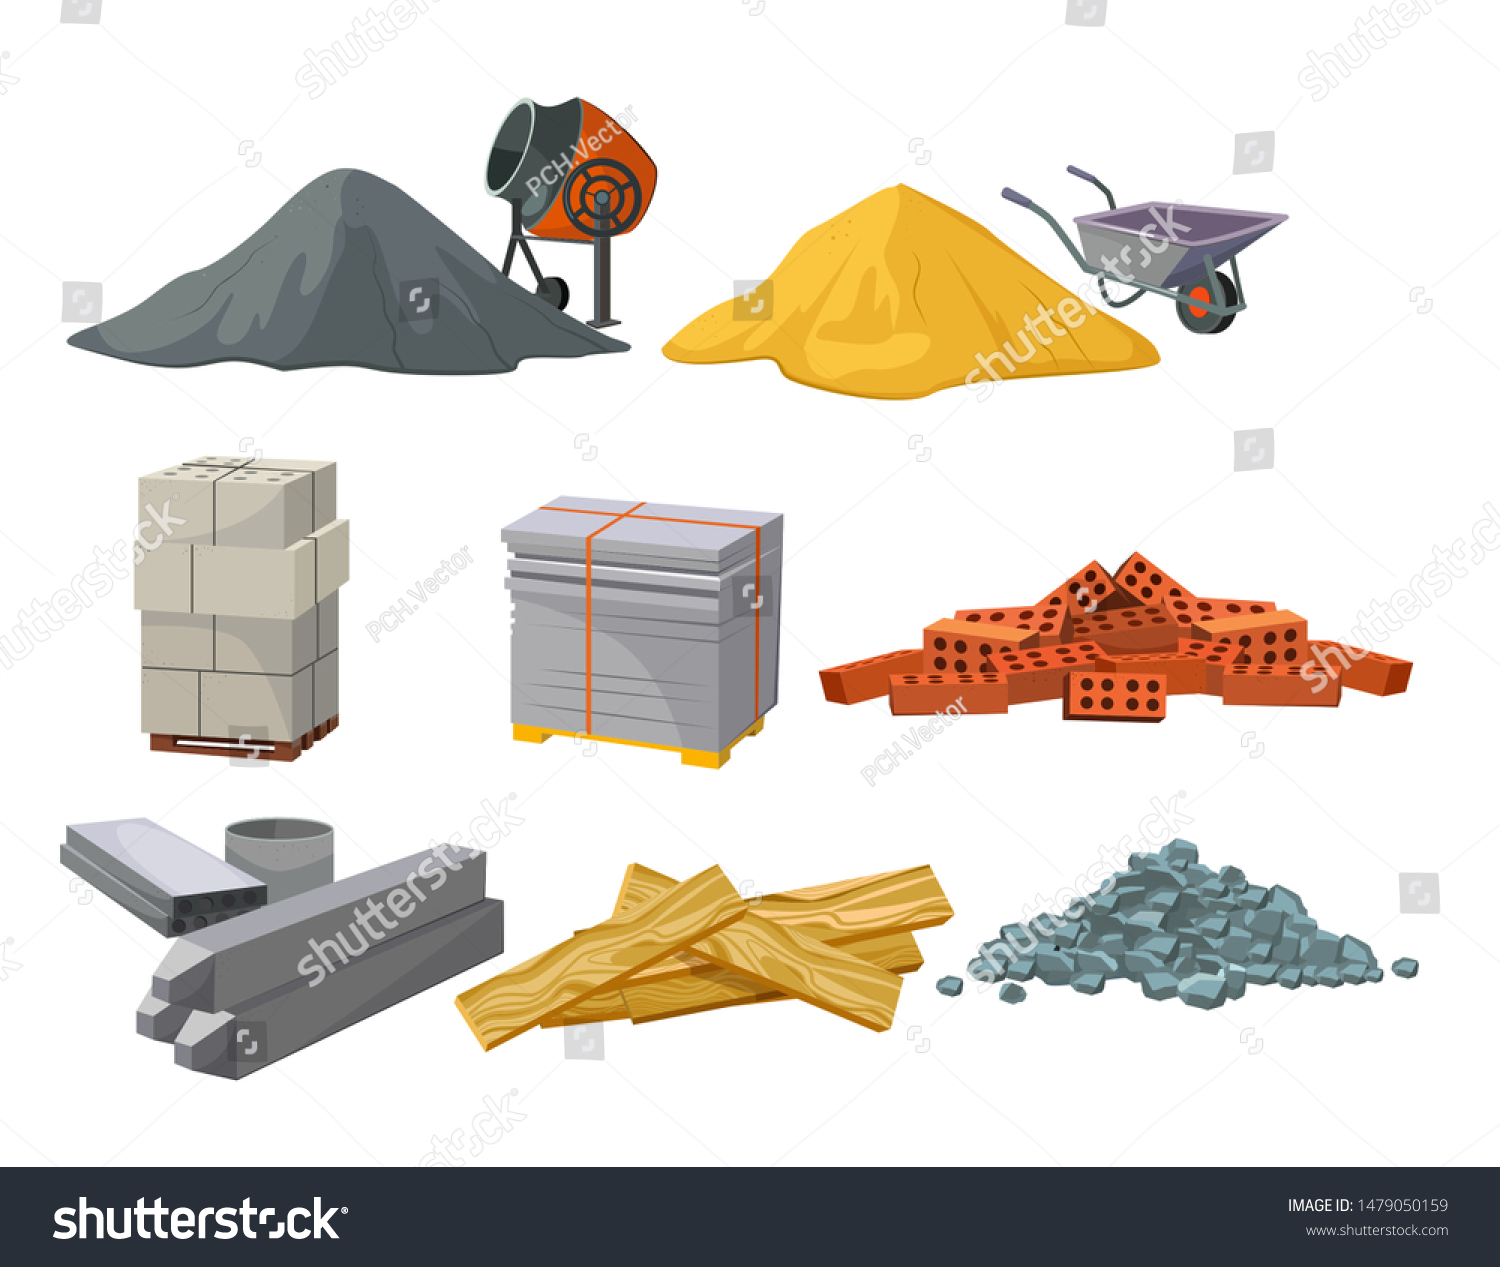 SVG of Building material heaps set. Bricks, sand, wooden planks, concrete mixer. Construction concept. Vector illustrations can be used for construction sites, works, industry svg